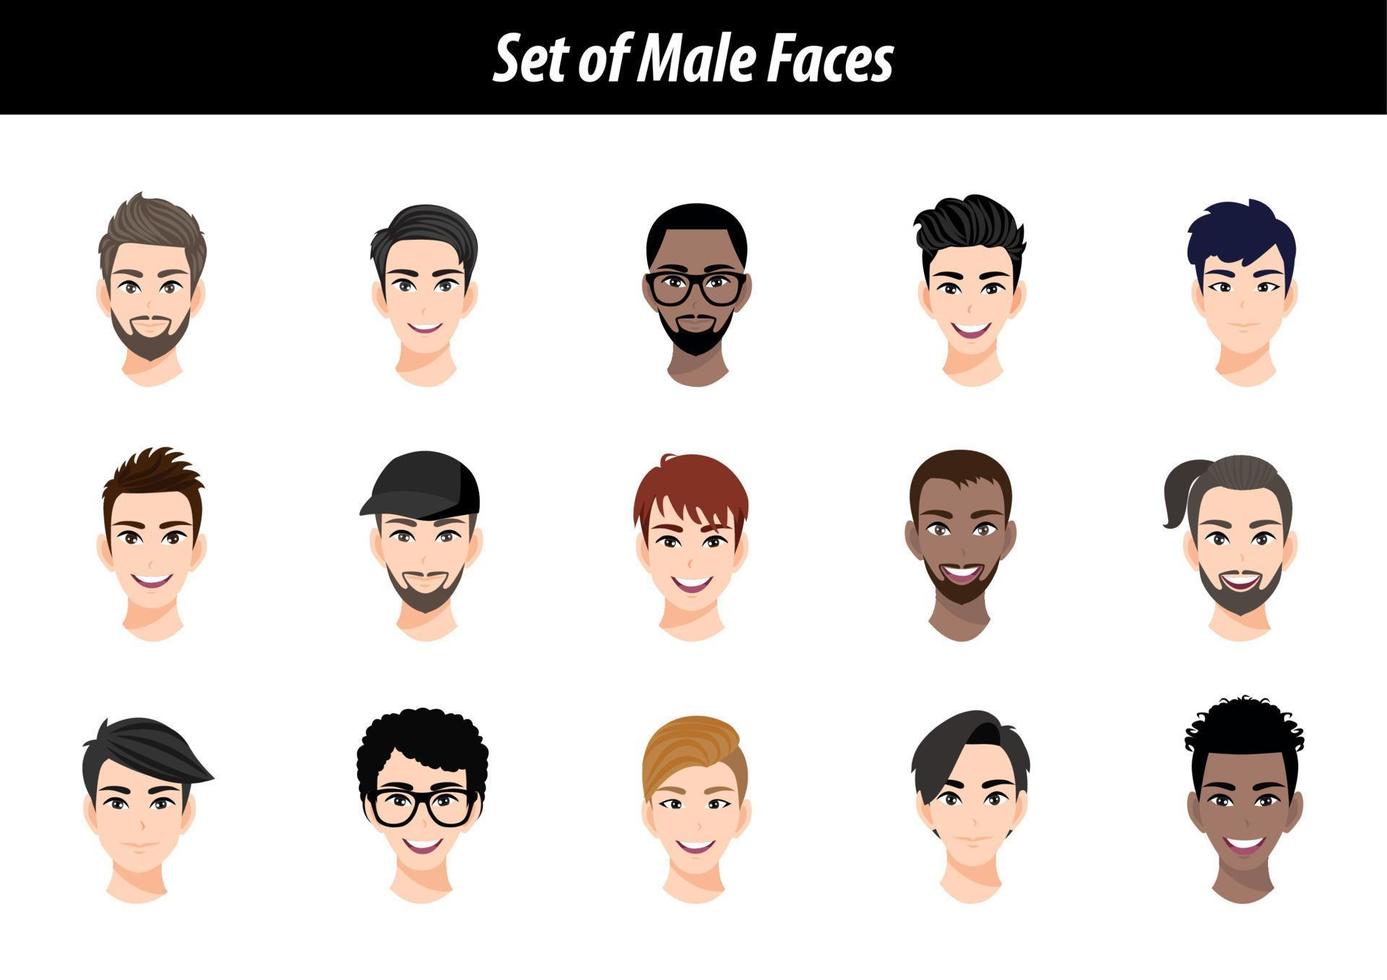 Set of male face avatar portraits isolated on white background. International men people heads flat vector illustration.